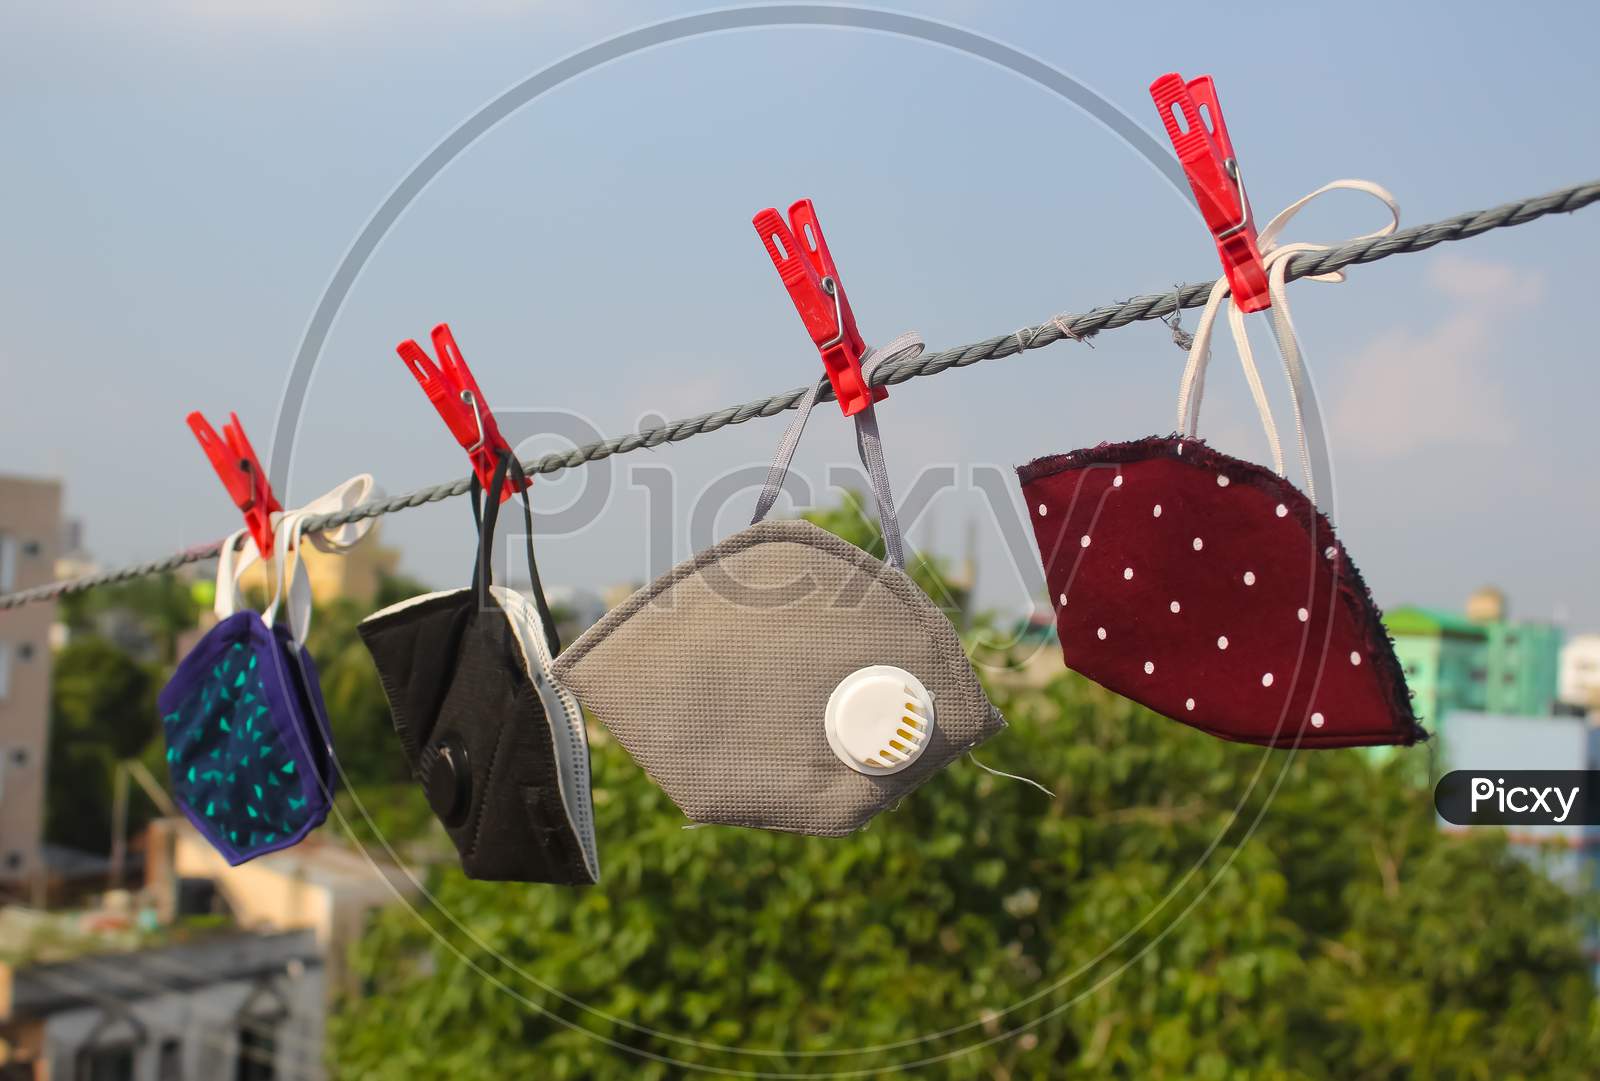 Handmade Mouth masks hanging in a Rope